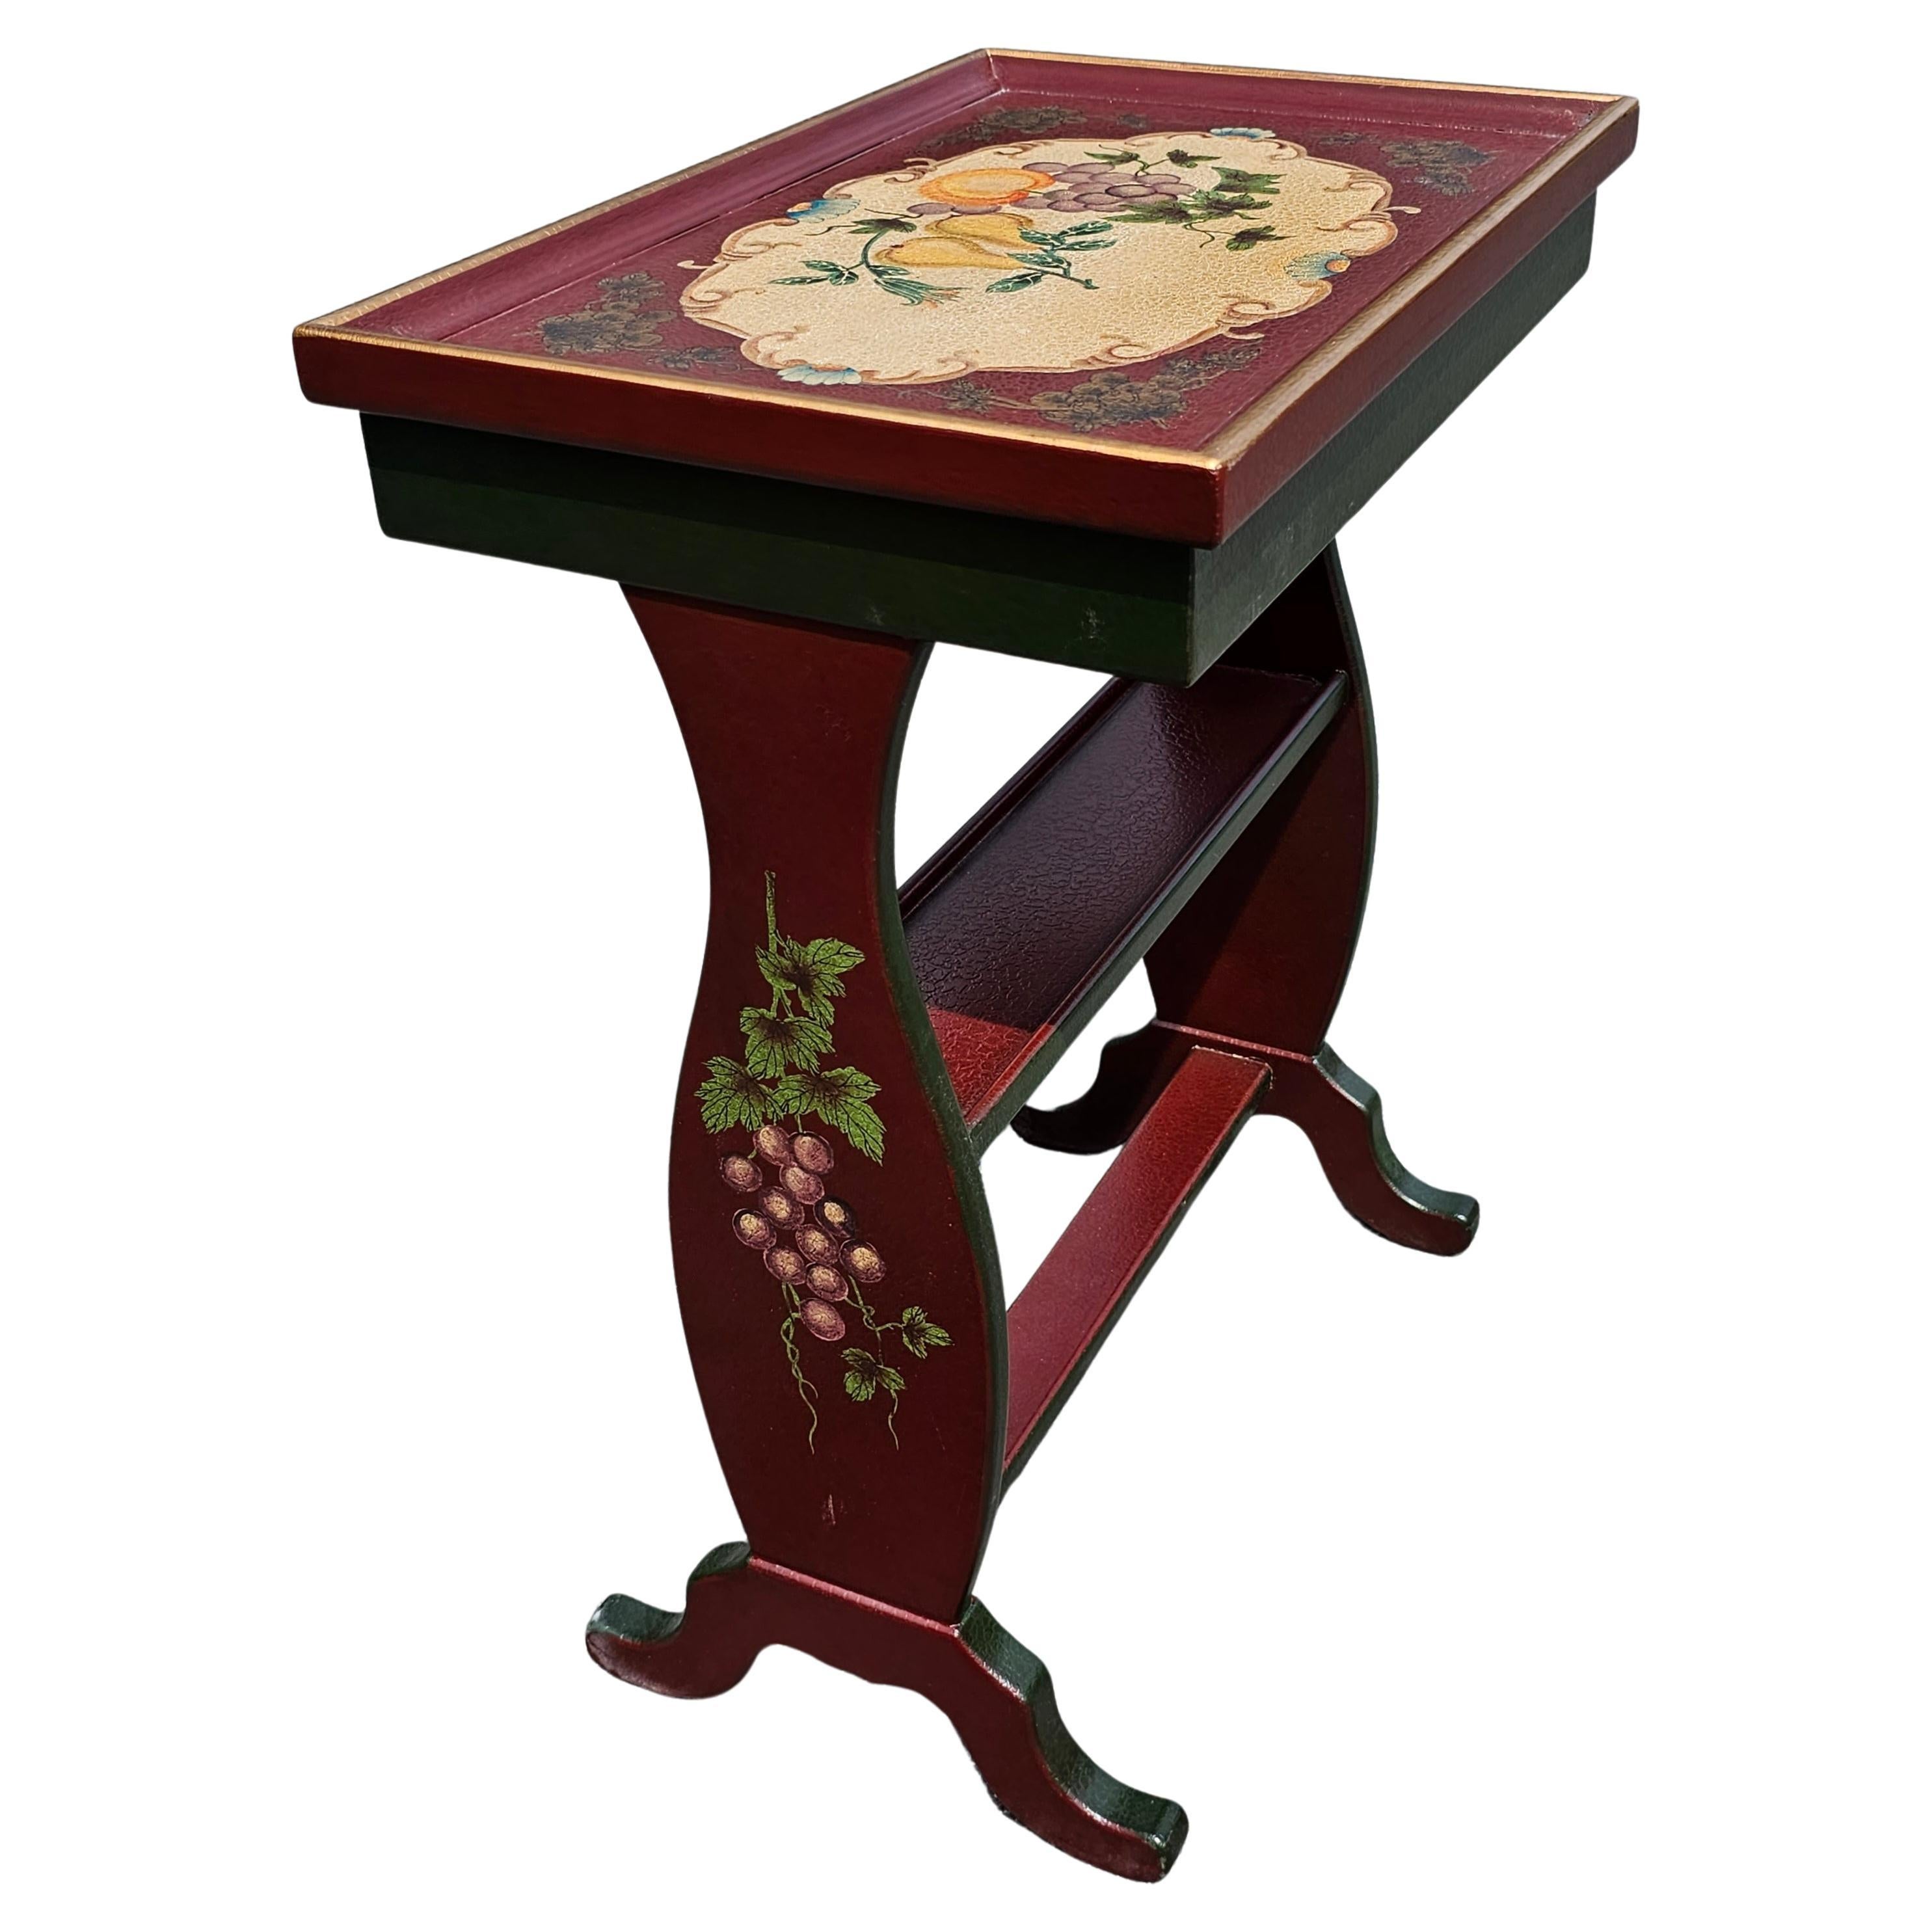 A Vintage Crackle Painted and decorated Two-Tier stretcher Side Table measuring 20